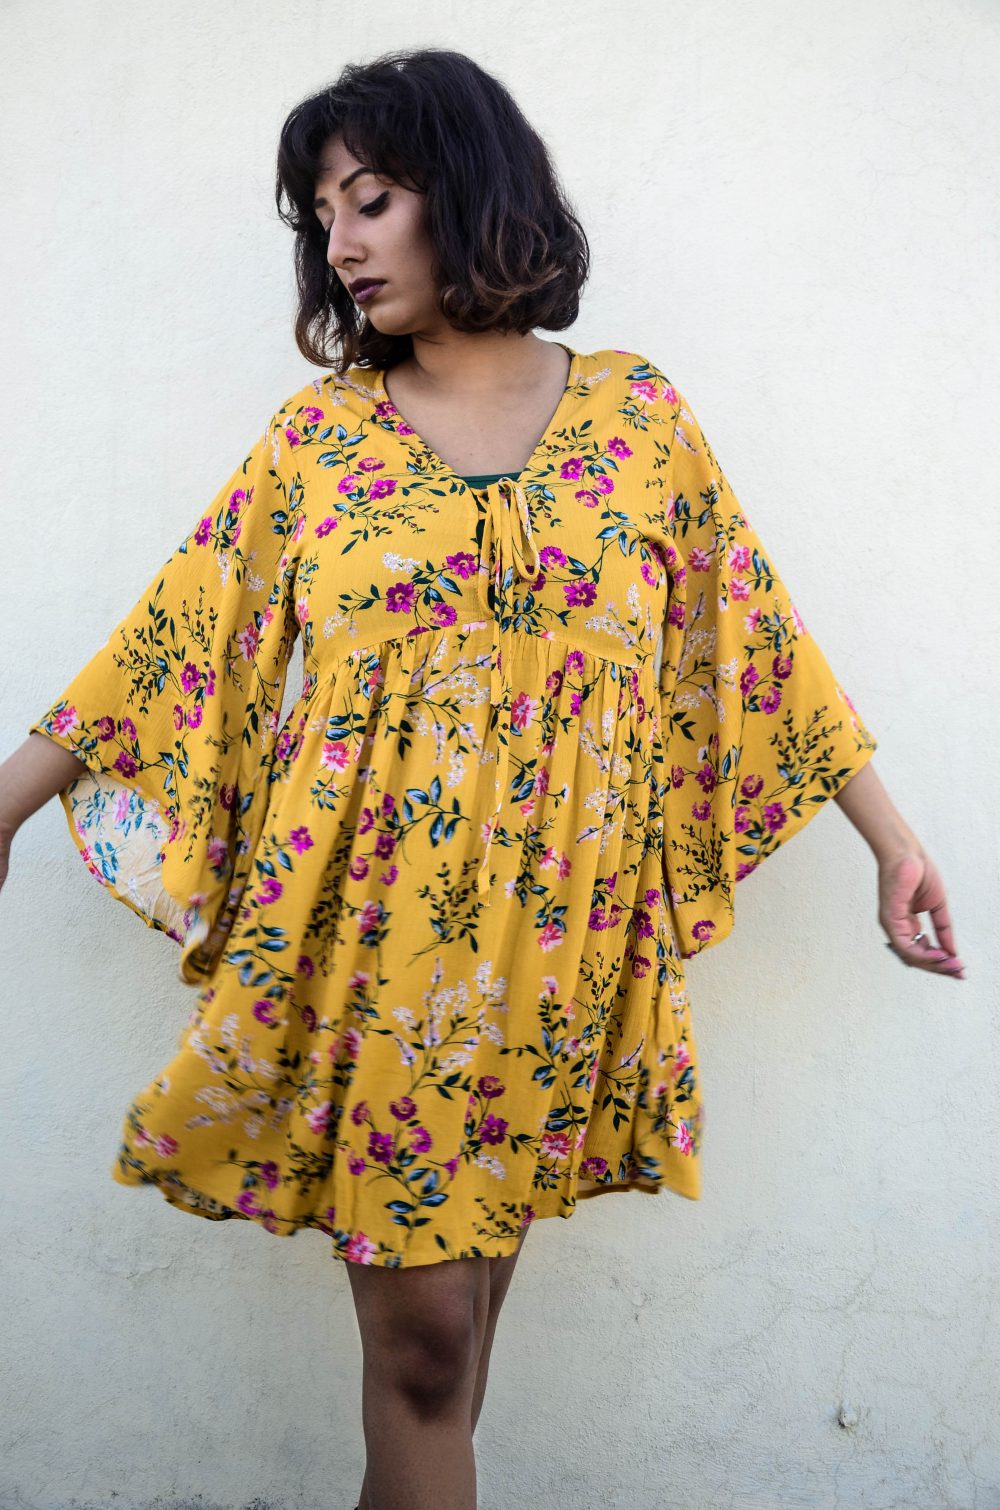 Floral ; Yellow ; Shift Dress ; Bohemian ; Lookbook ; Outfit ; fashion photography ; Romwe ; combat boots ; wine lips ; grunge ; ootd ; fall look ; tropical ; sunset ; strong ; Dark ; winter fashion ; fall 17 ; Hyderabad ; Editorial ; Naznin ; Naznin Suhaer ; dusky; model ; indian blogger ; hyderabad fashion bloggers ; hyderabad bloggers ; hyderabad fashion blogger ; I Dress for the Applause ;